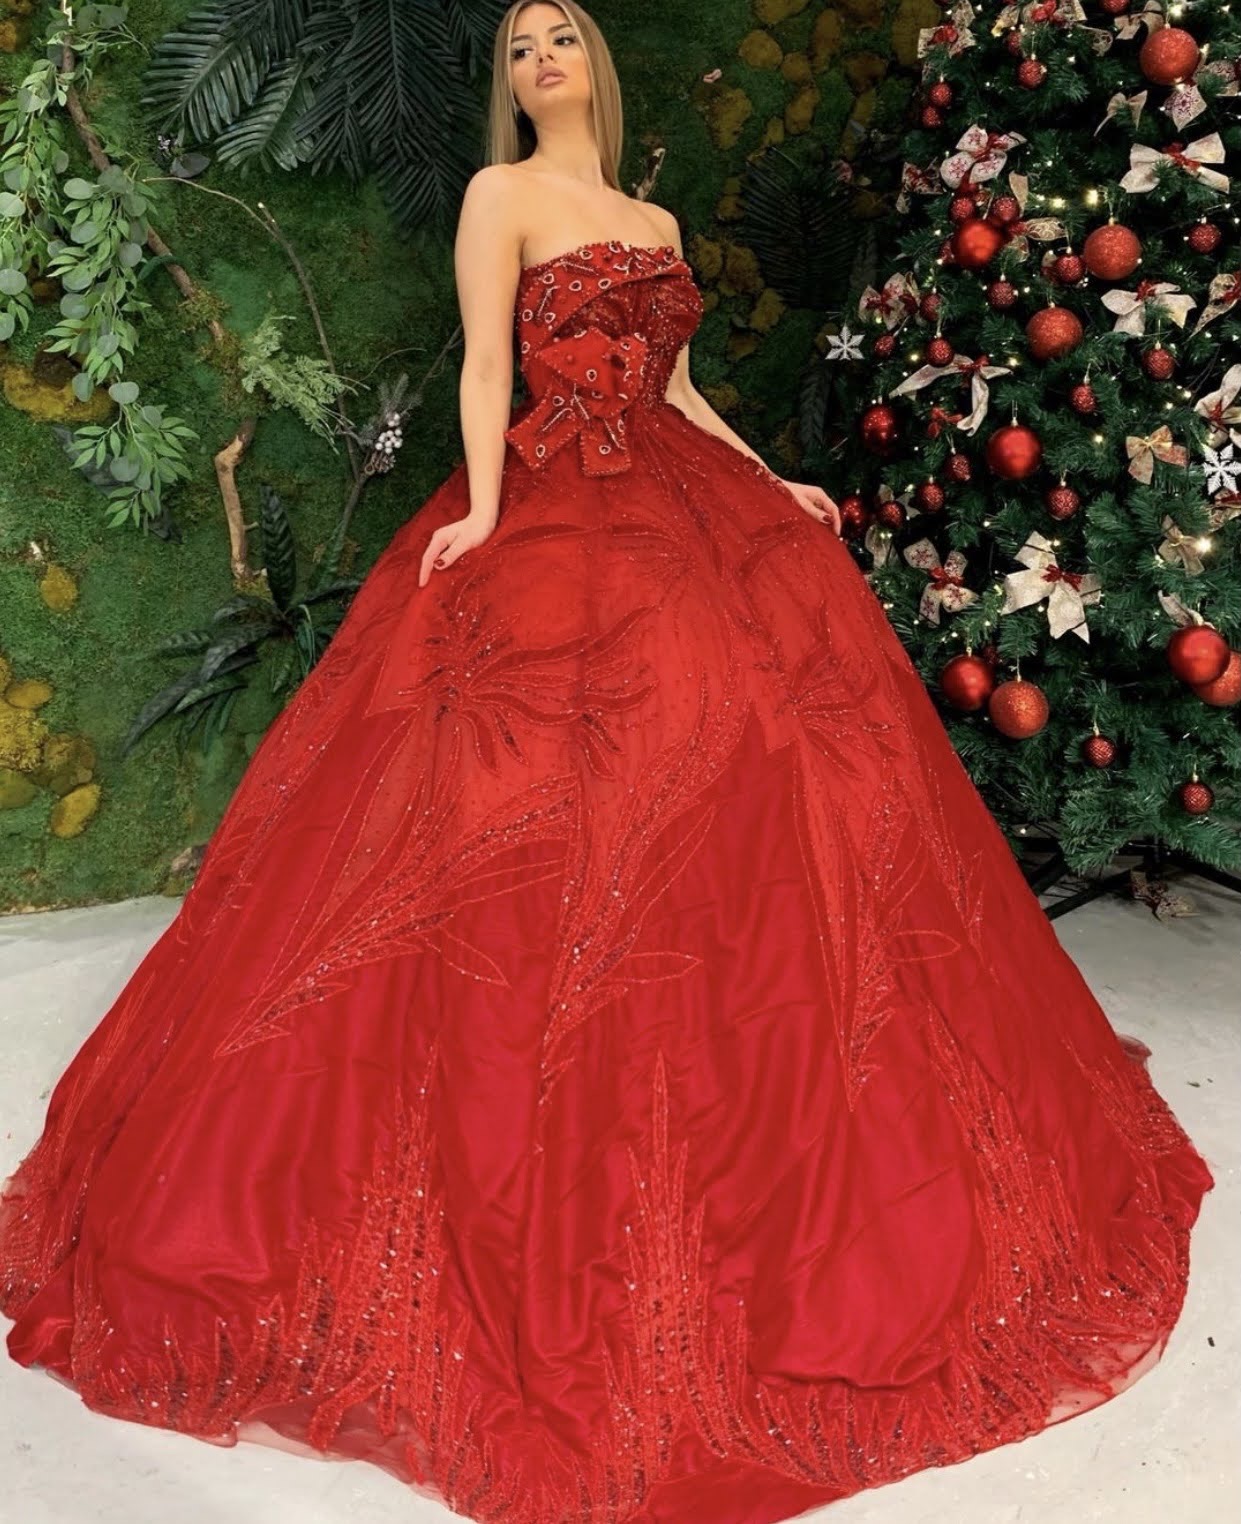 Red embellished ball gown dress ...